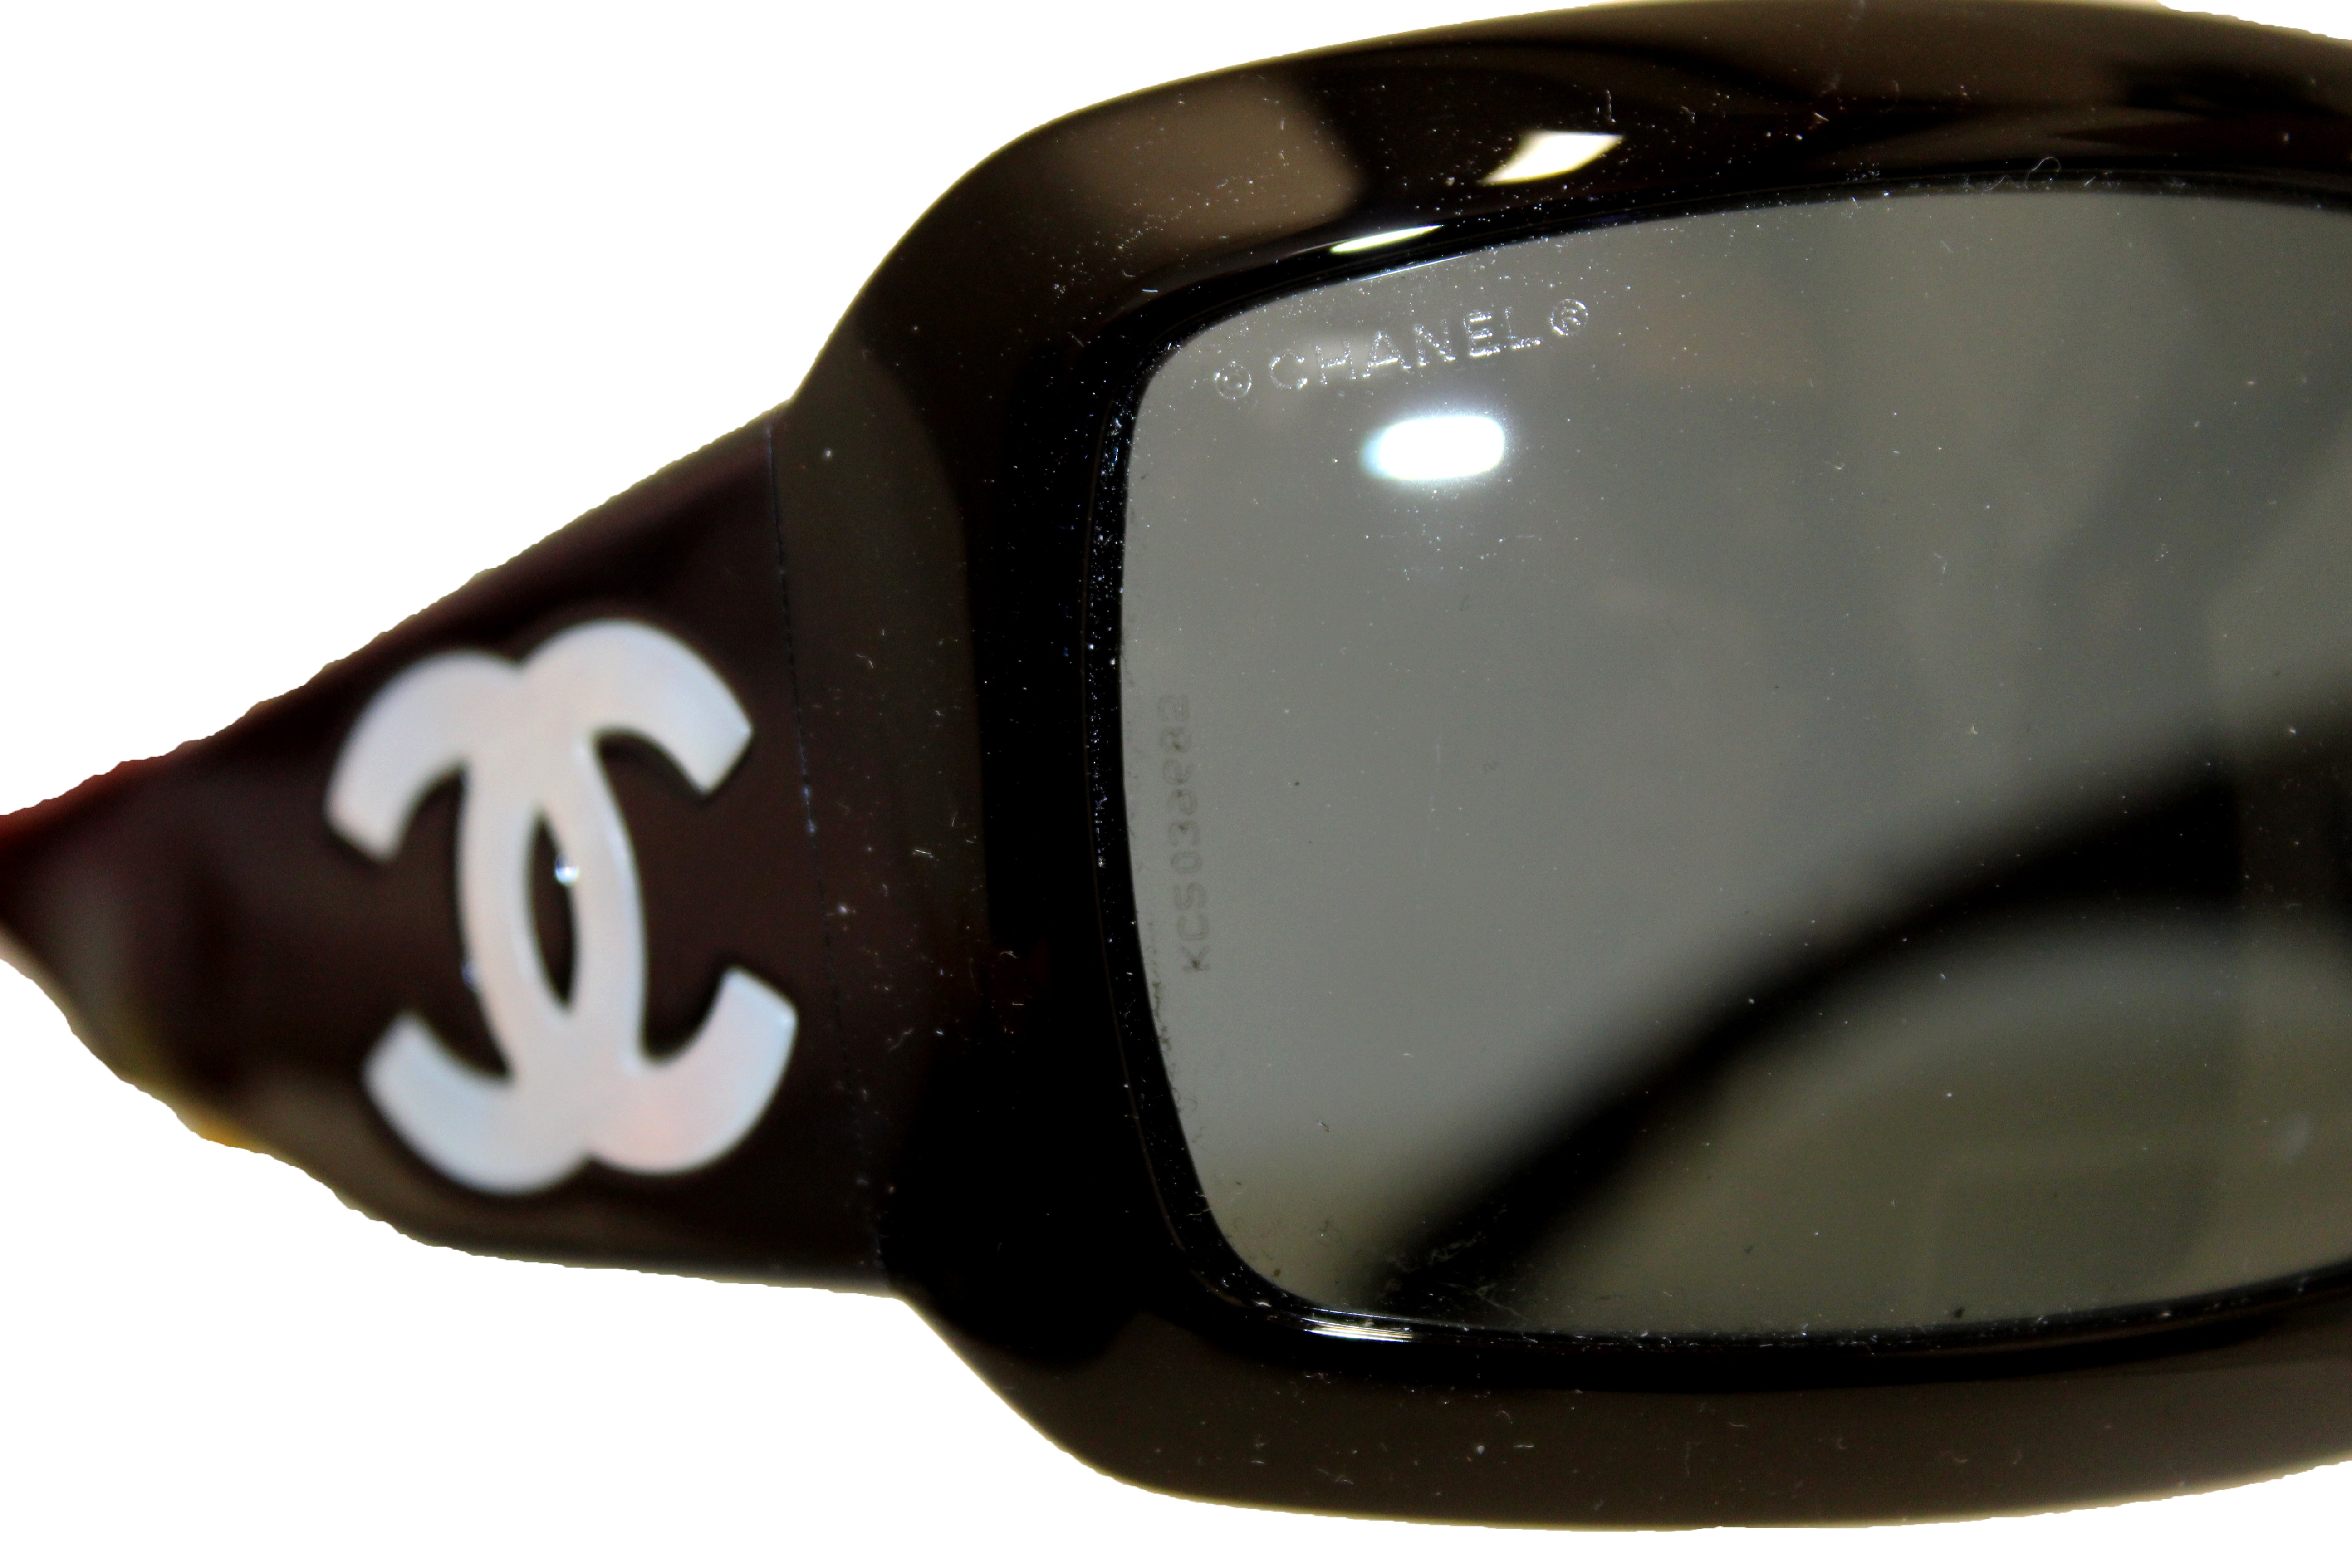 CHANEL Mother of Pearl 5076H Black Sunglasses Gray Lens